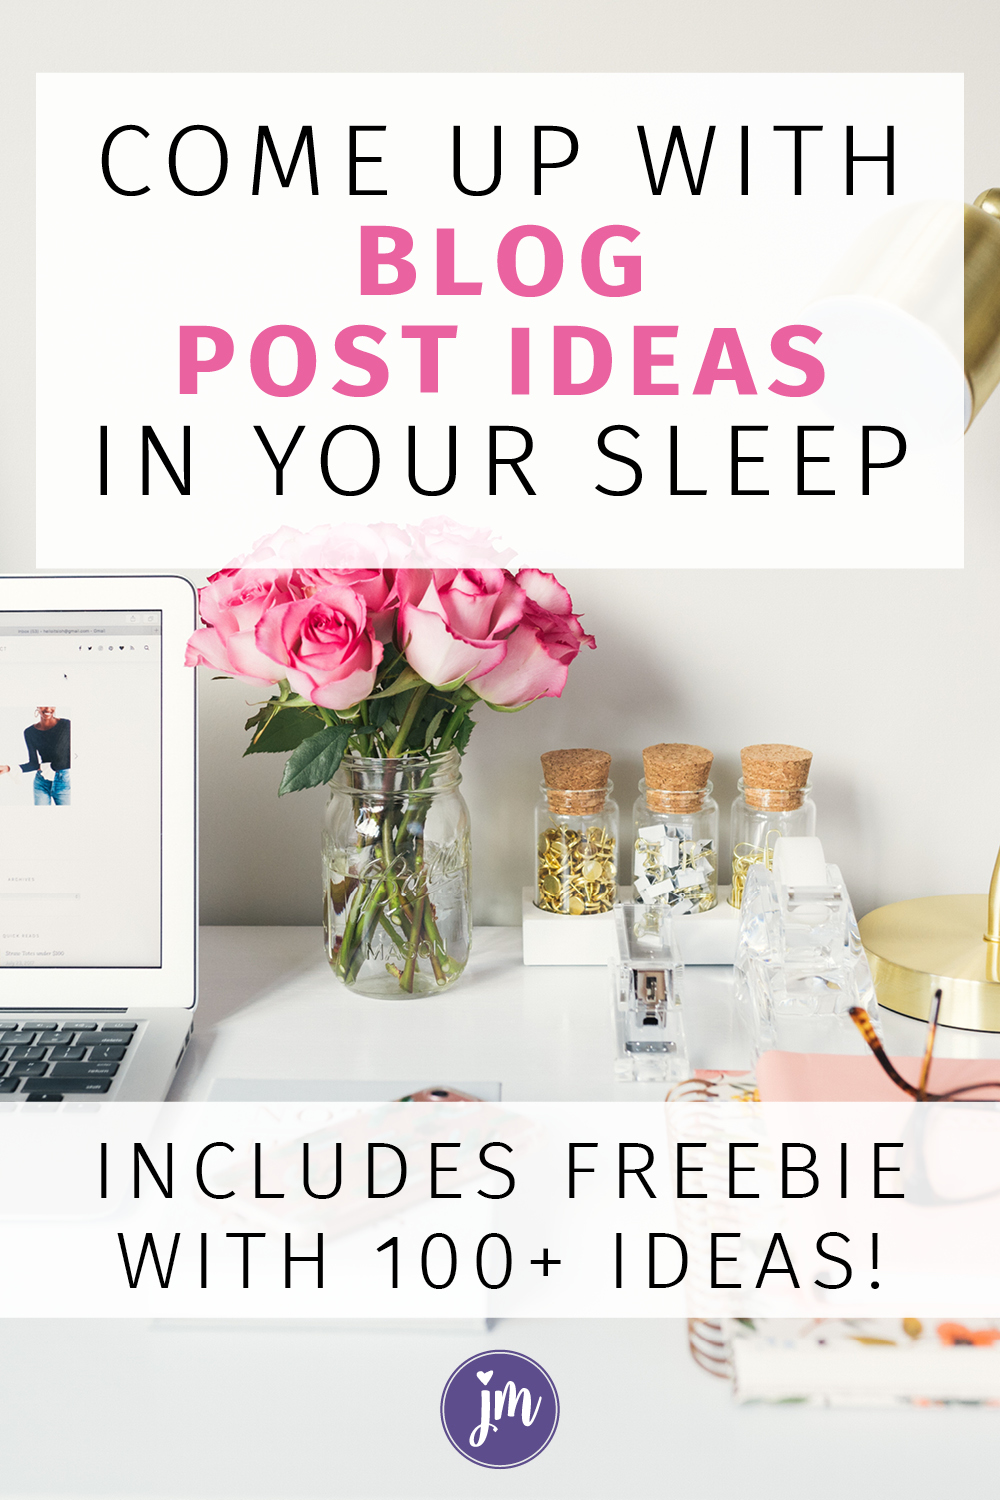 How to Come Up With Blog Post Ideas In Your Sleep